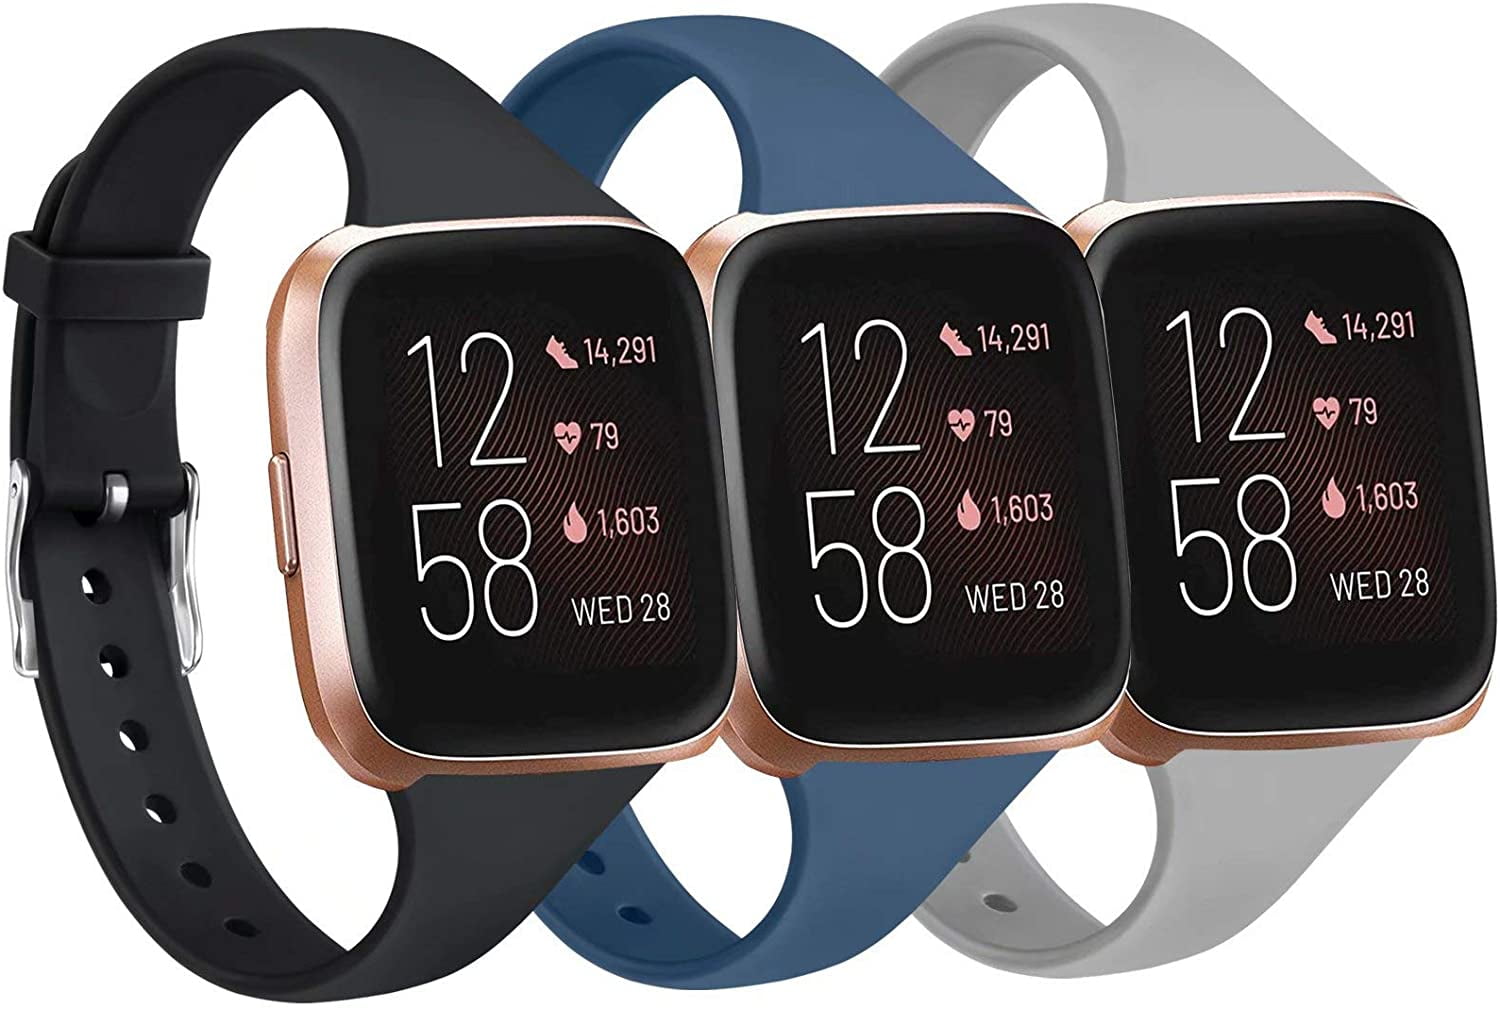 Vancle Bands Compatible with Fitbit Versa Bands for Women Men Rose Gold Silicone Wristbands for Fitbit Versa Bands/Fitbit Versa Lite Bands/Fitbit Versa 2 Bands 